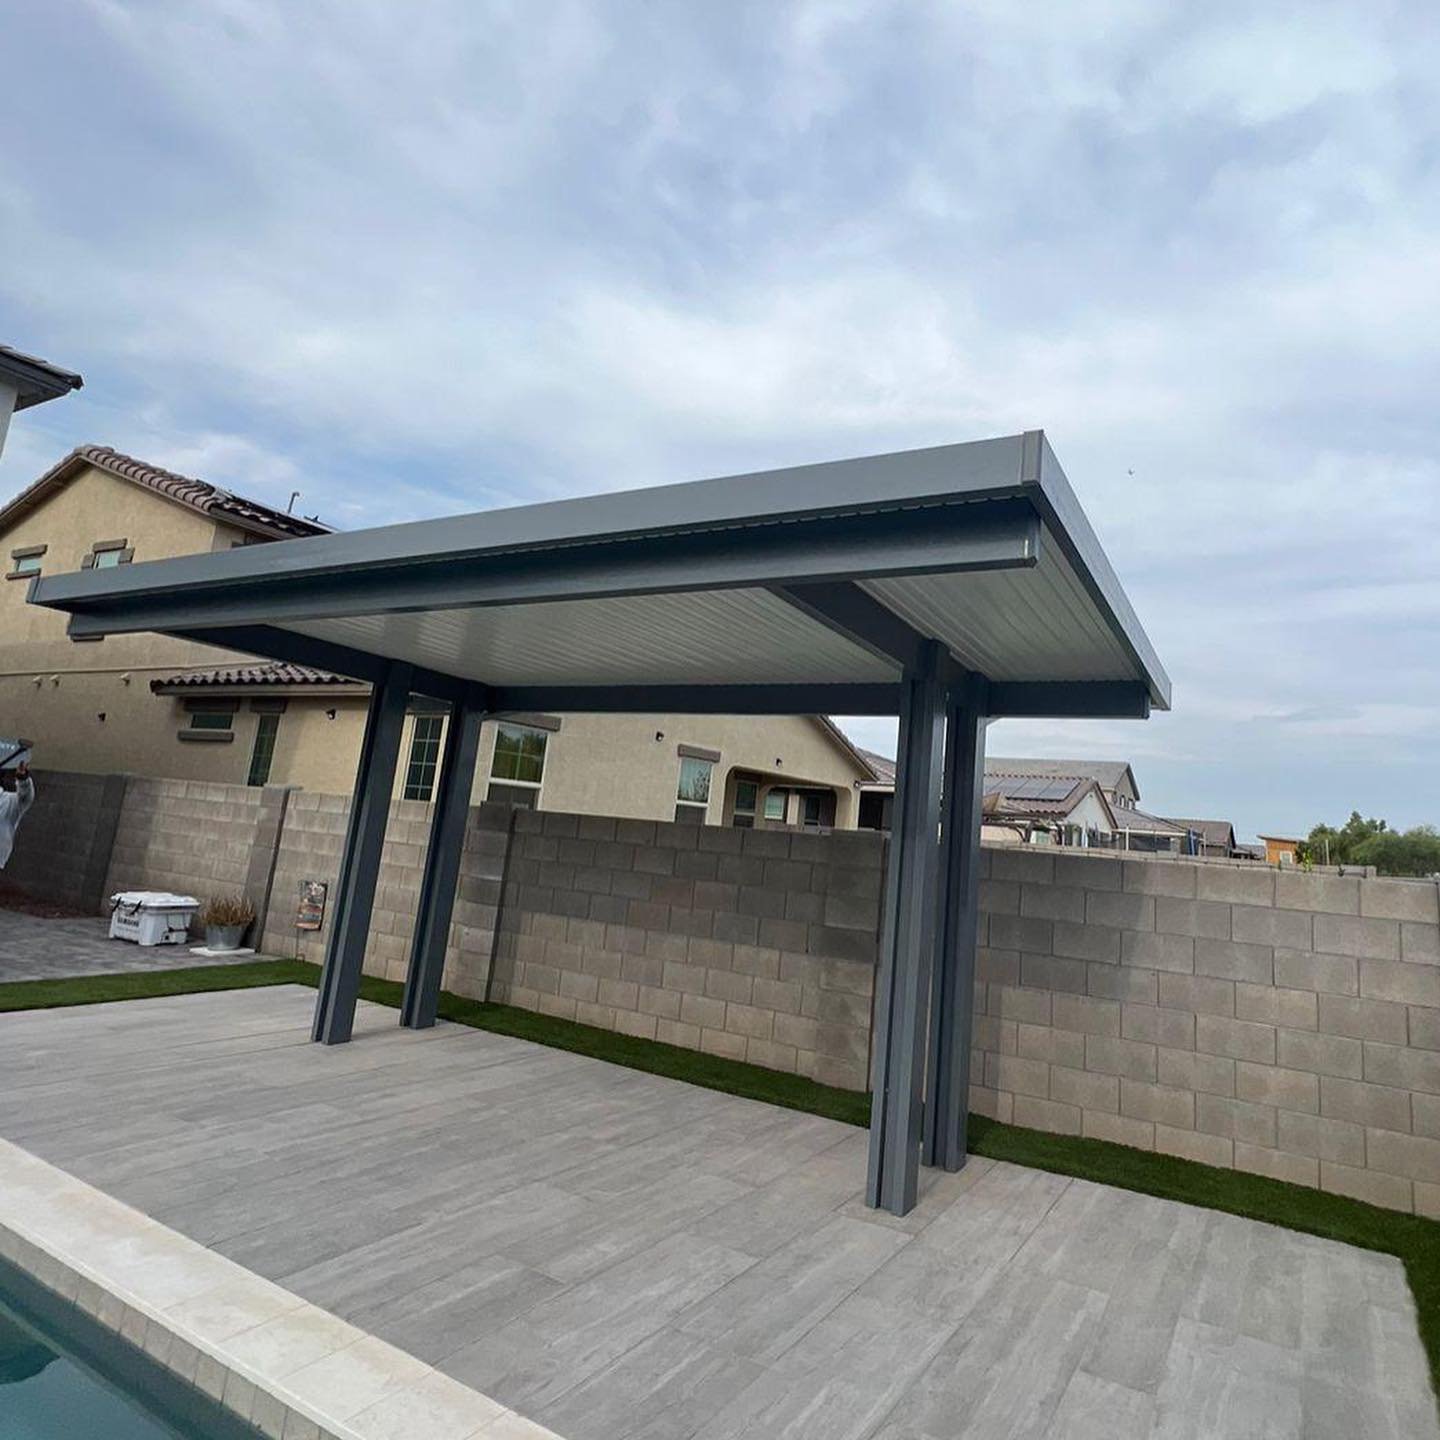 Solid Flat Pan Cover Installation Services by Outshine Patio Cover near Phoenix AZ (Copy)